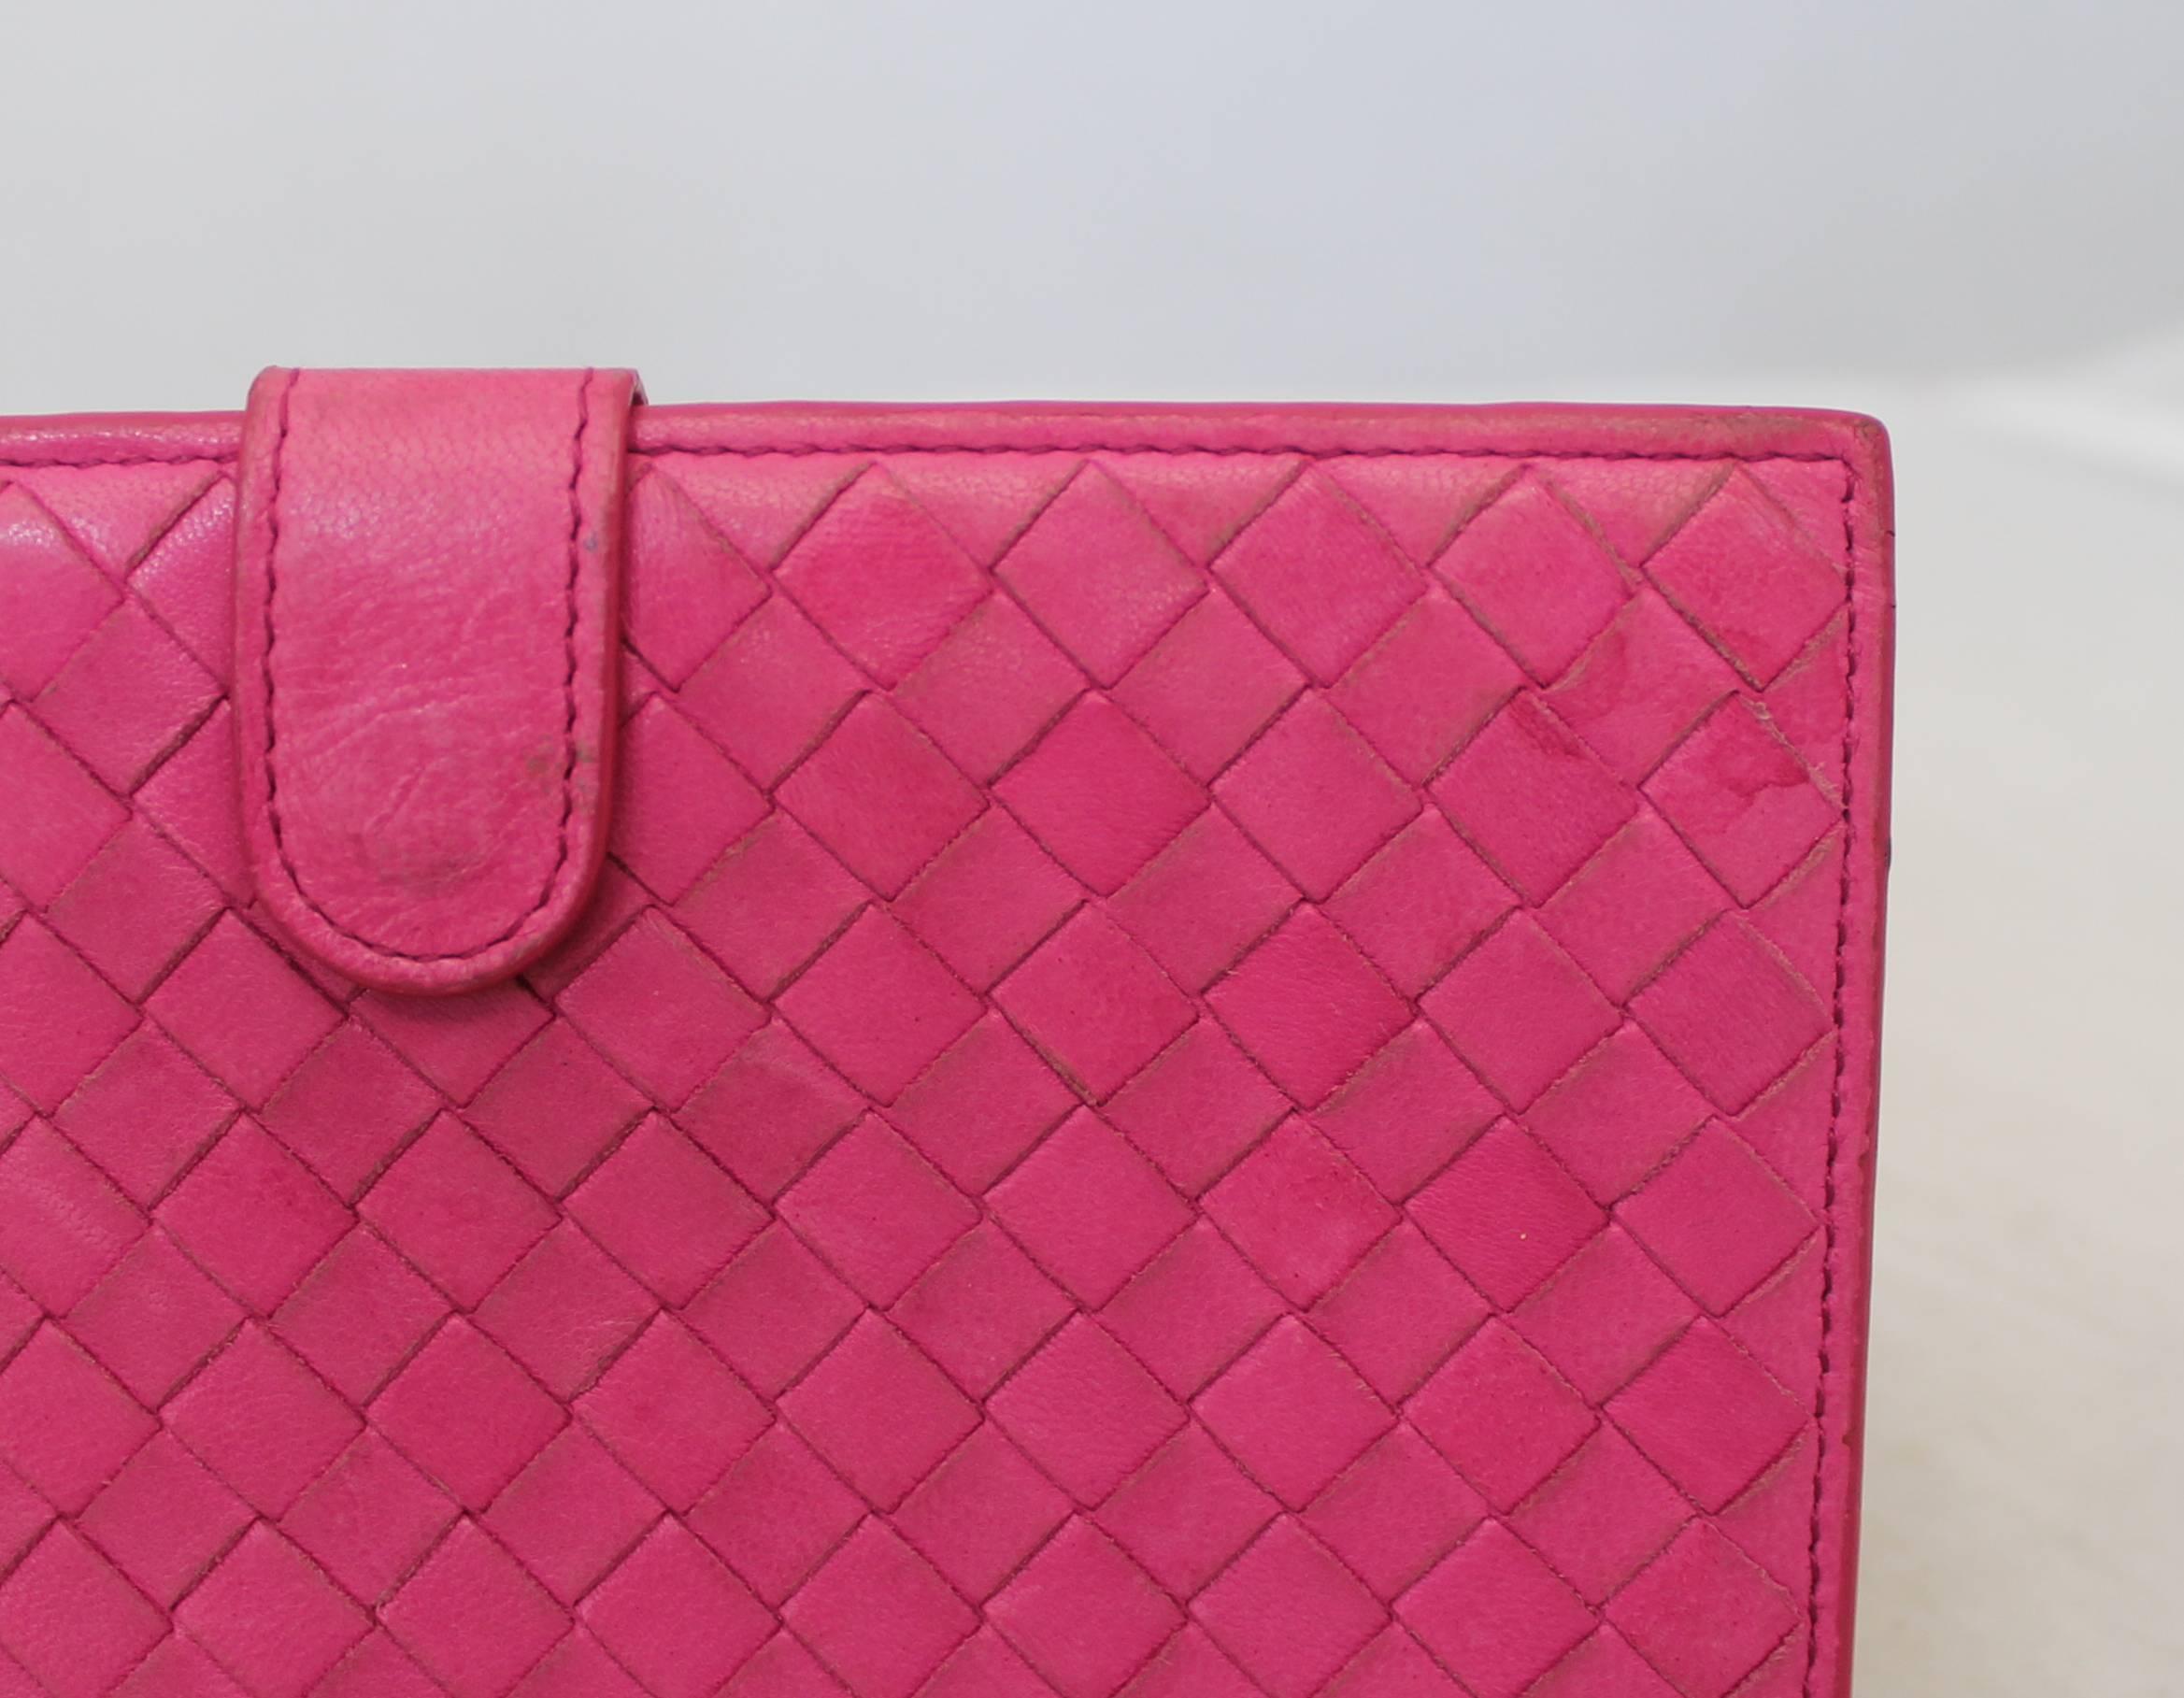 Bottega Veneta Pink Woven Leather Wallet.  This wallet is in fair condition; it has wear on the leather, slight water stain on top right corner of the front, and some wear along the edges.  It has beautiful, smooth leather woven detail.  The